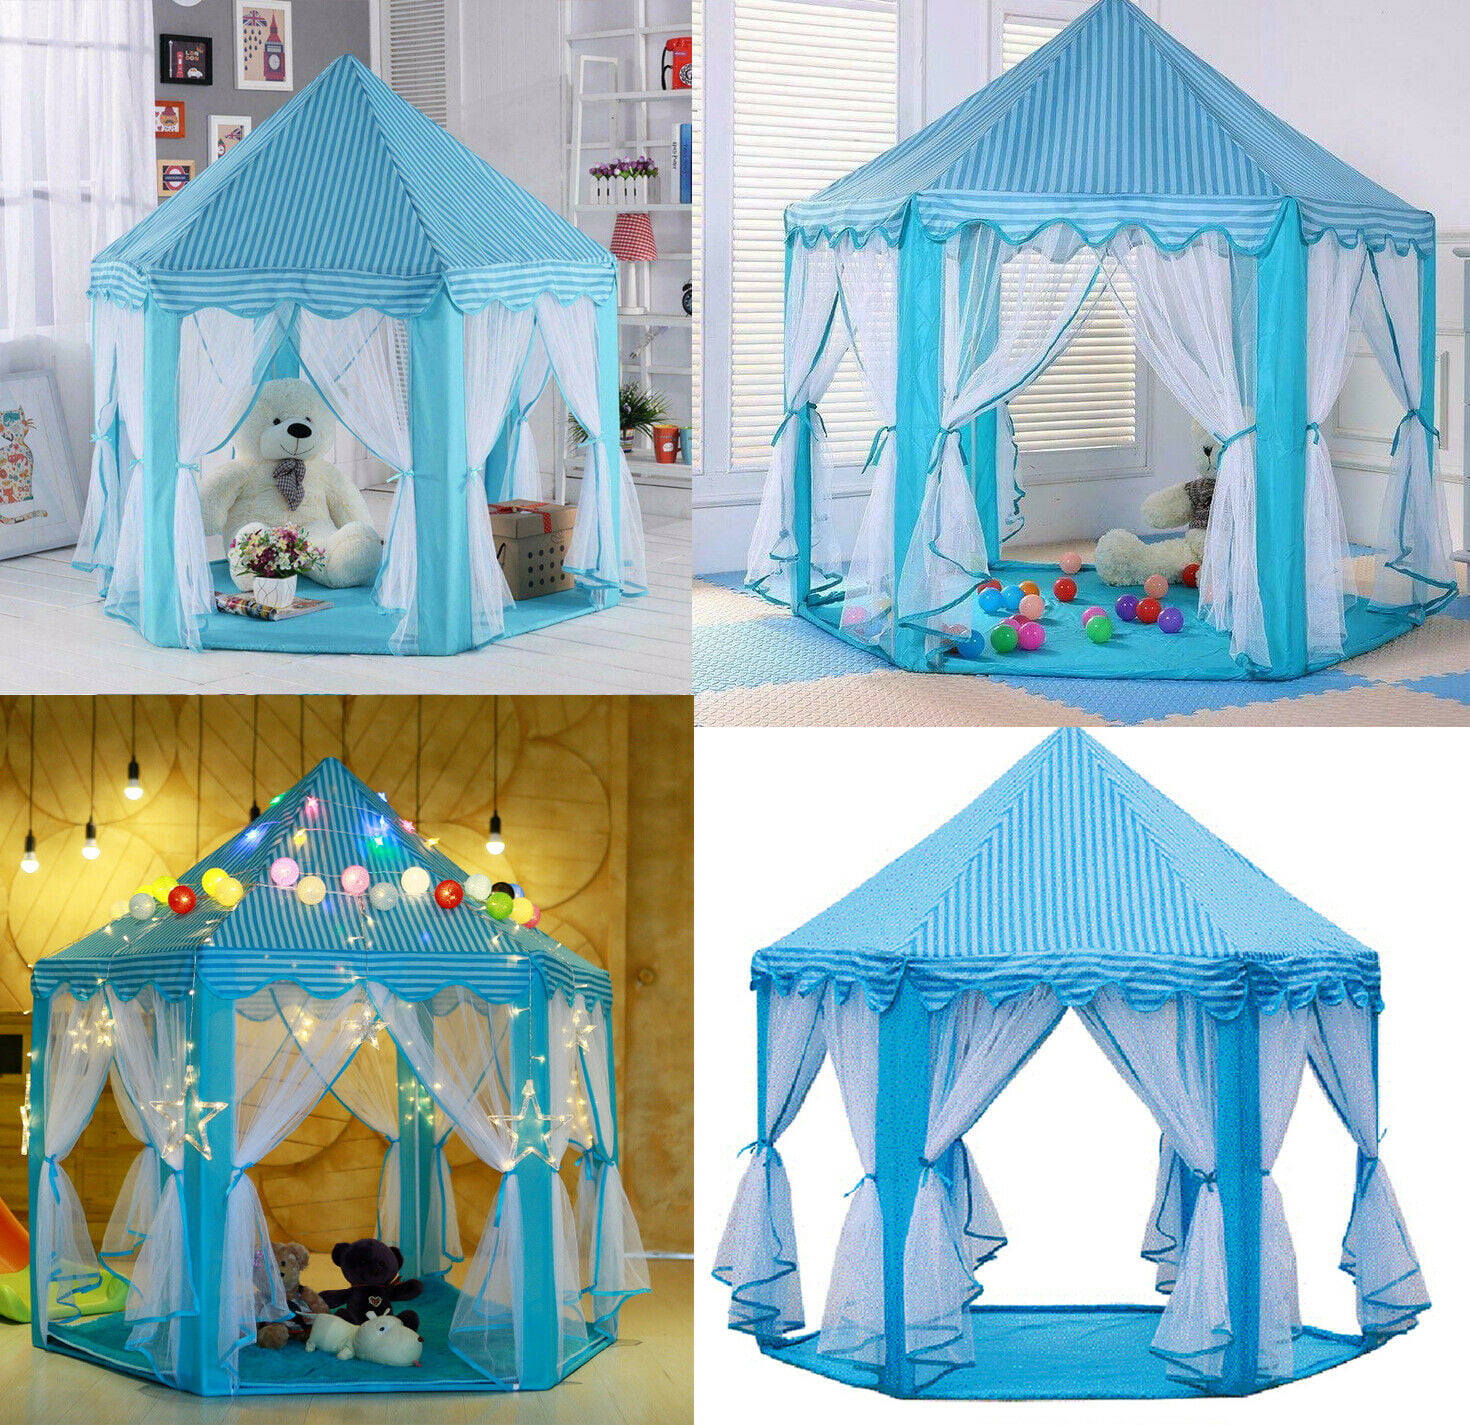 Princess Castle Play House Tent Large Indoor/Outdoor Playhouse for Kid Children 